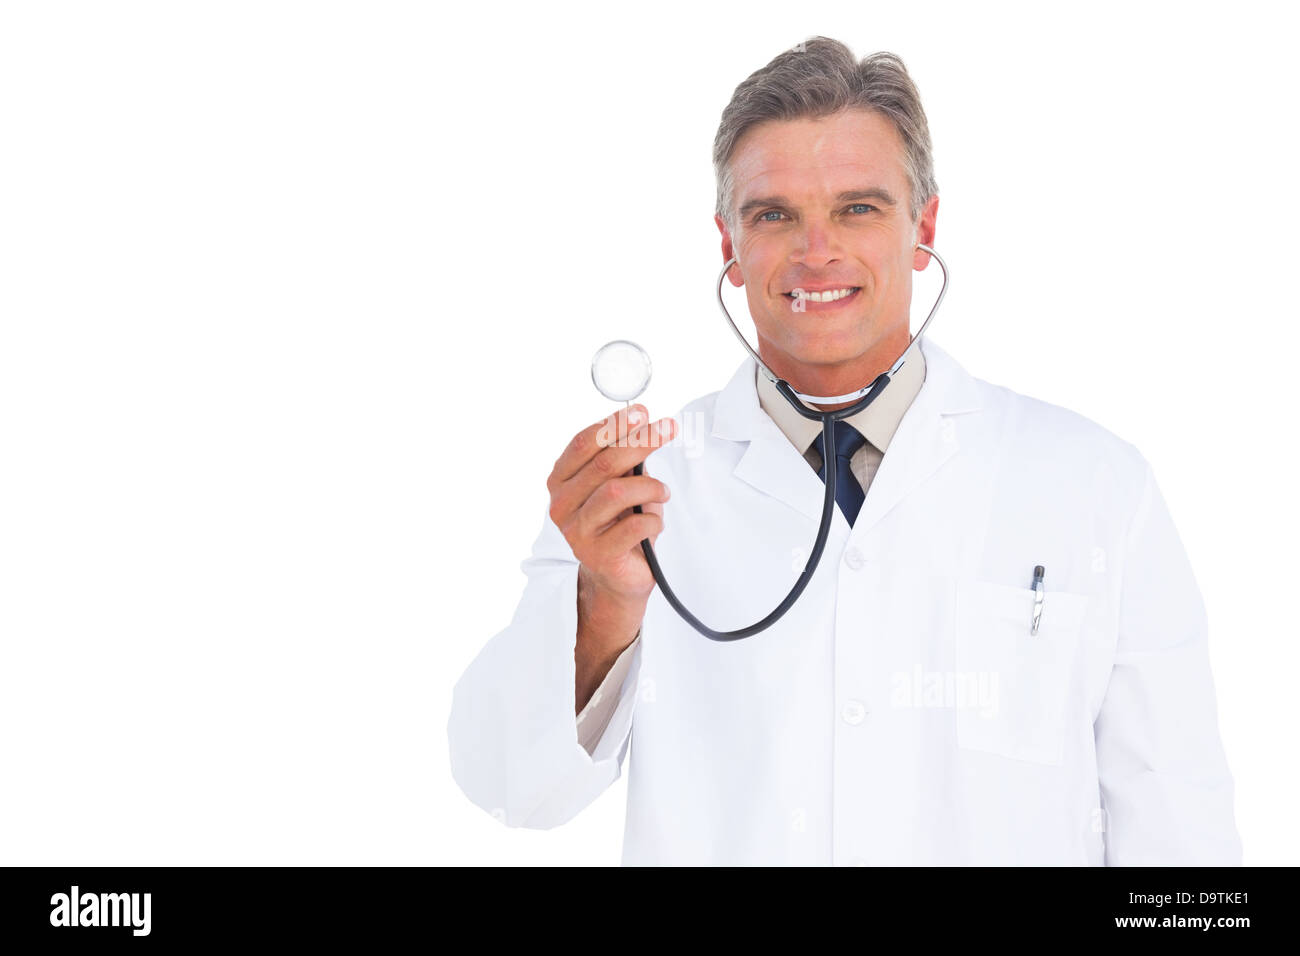 Smiling doctor with stethoscope Banque D'Images